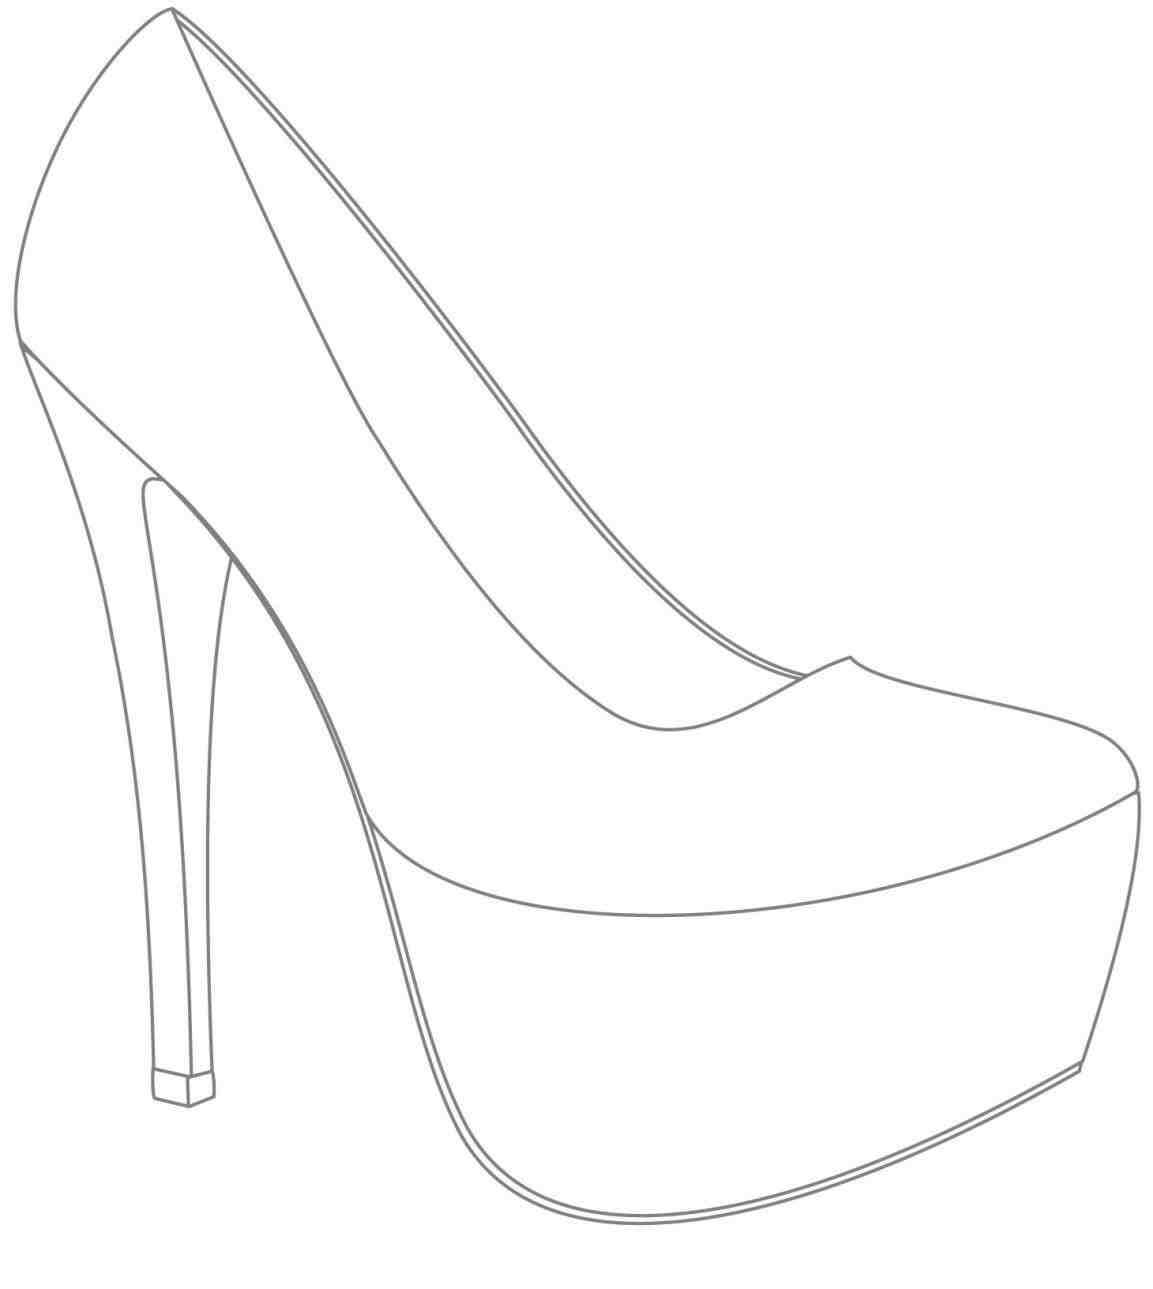 High Heel Drawing Template At Paintingvalley | Explore Within High Heel Shoe Template For Card